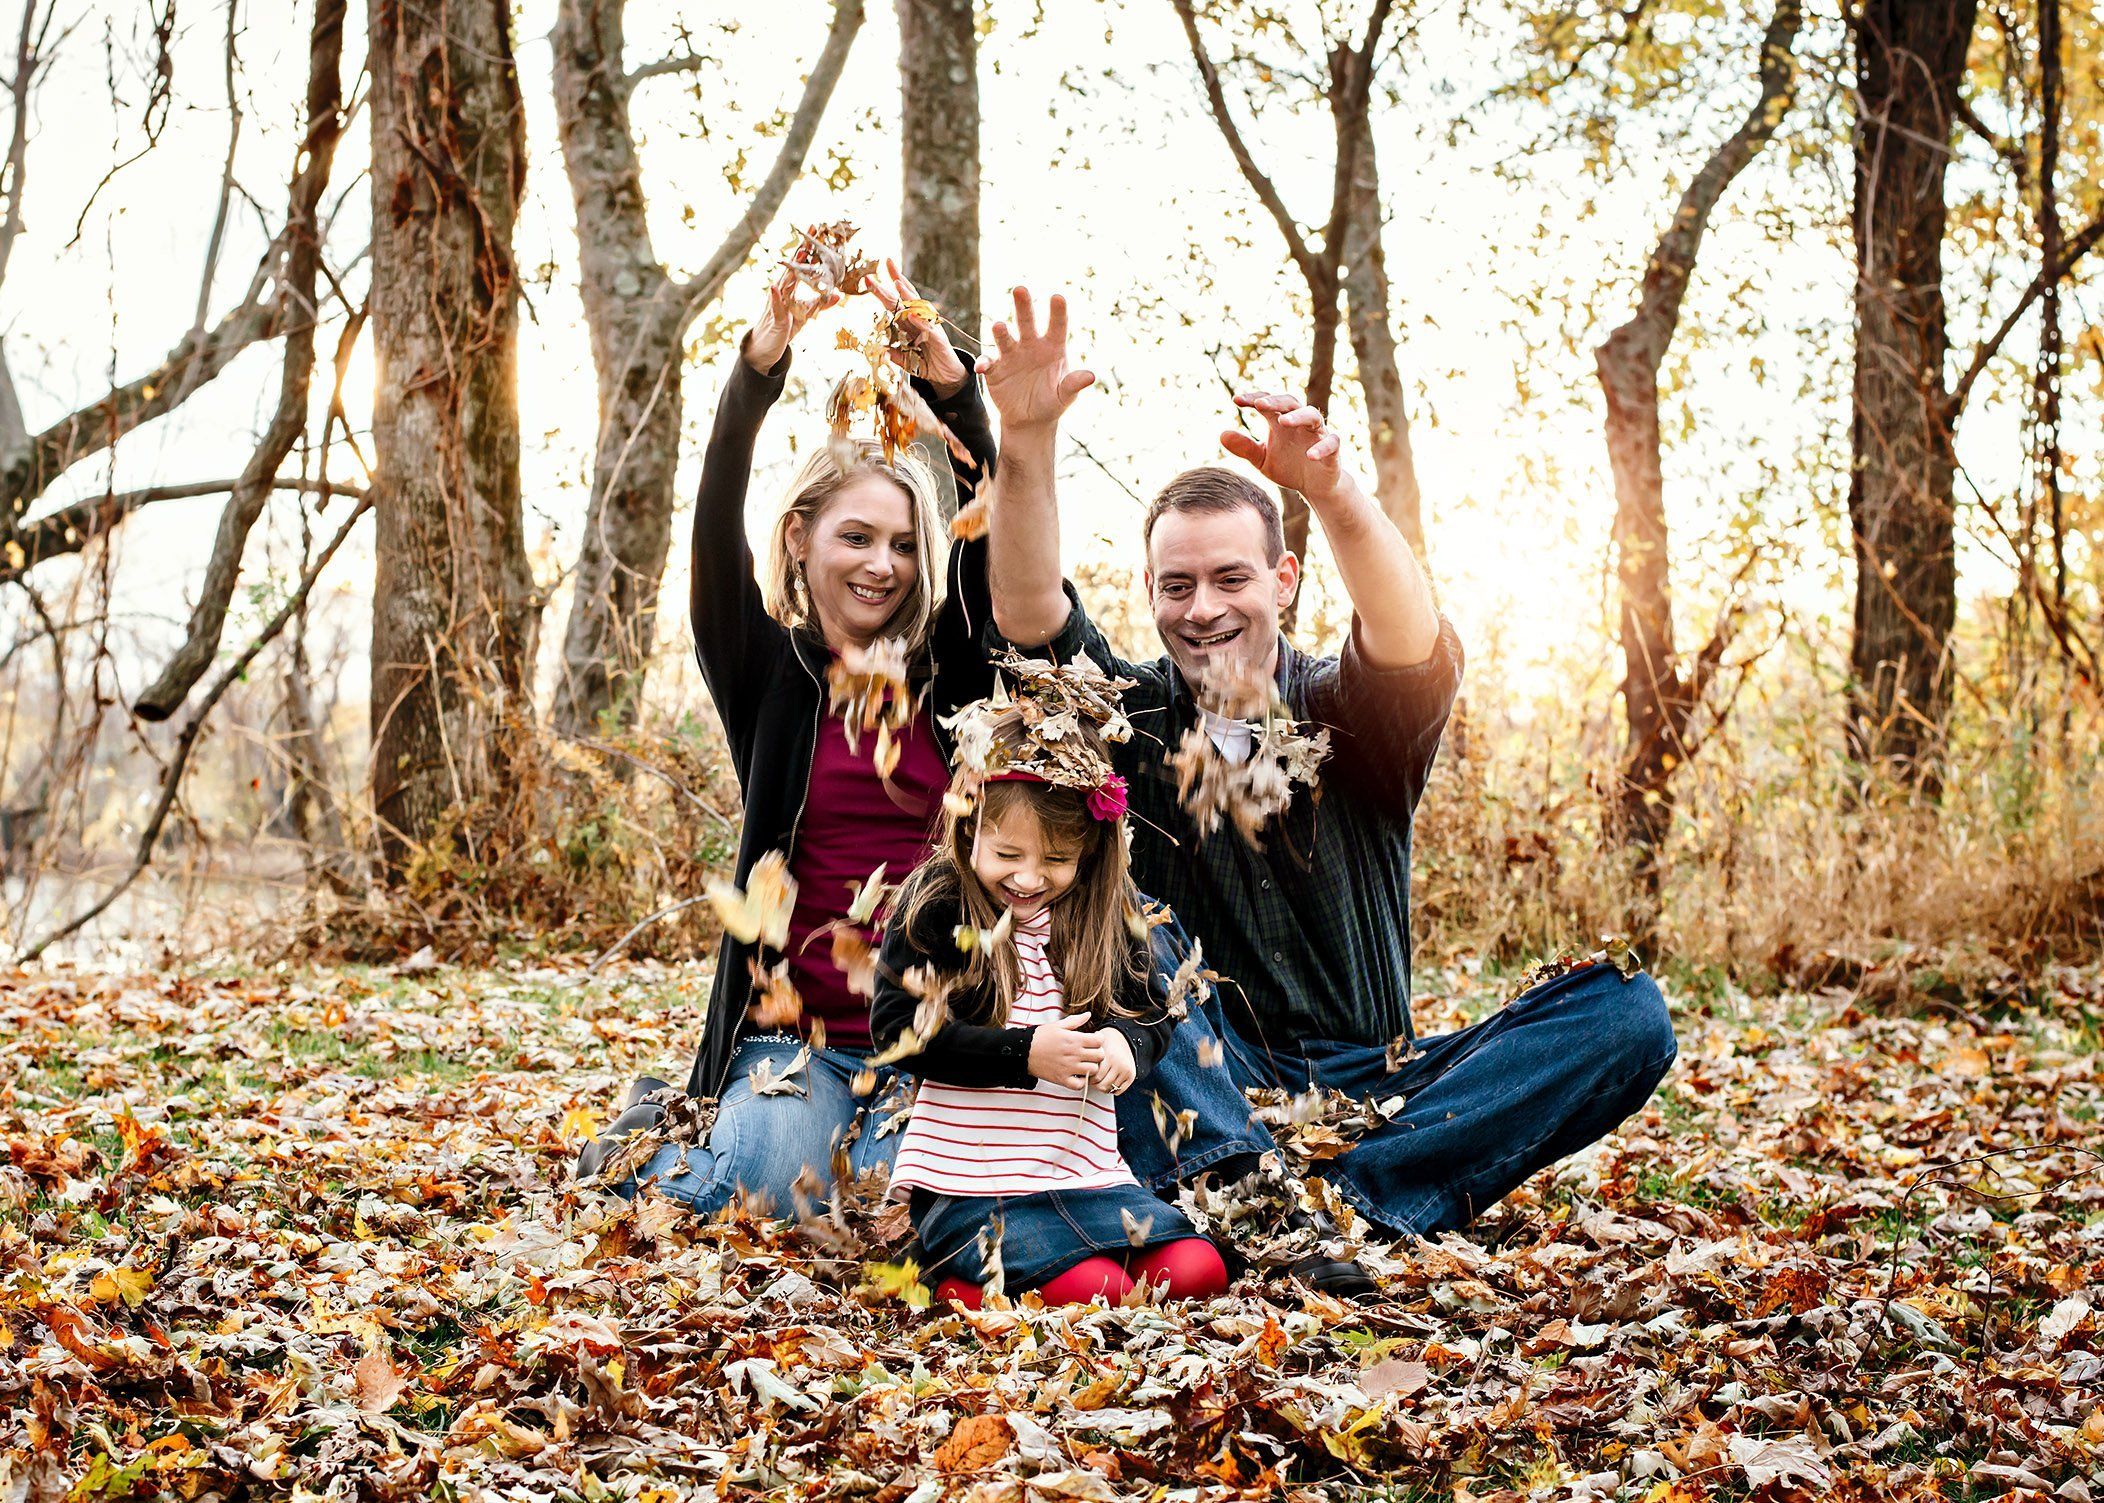 Mom and Dad shower their young daughter with fall leaves